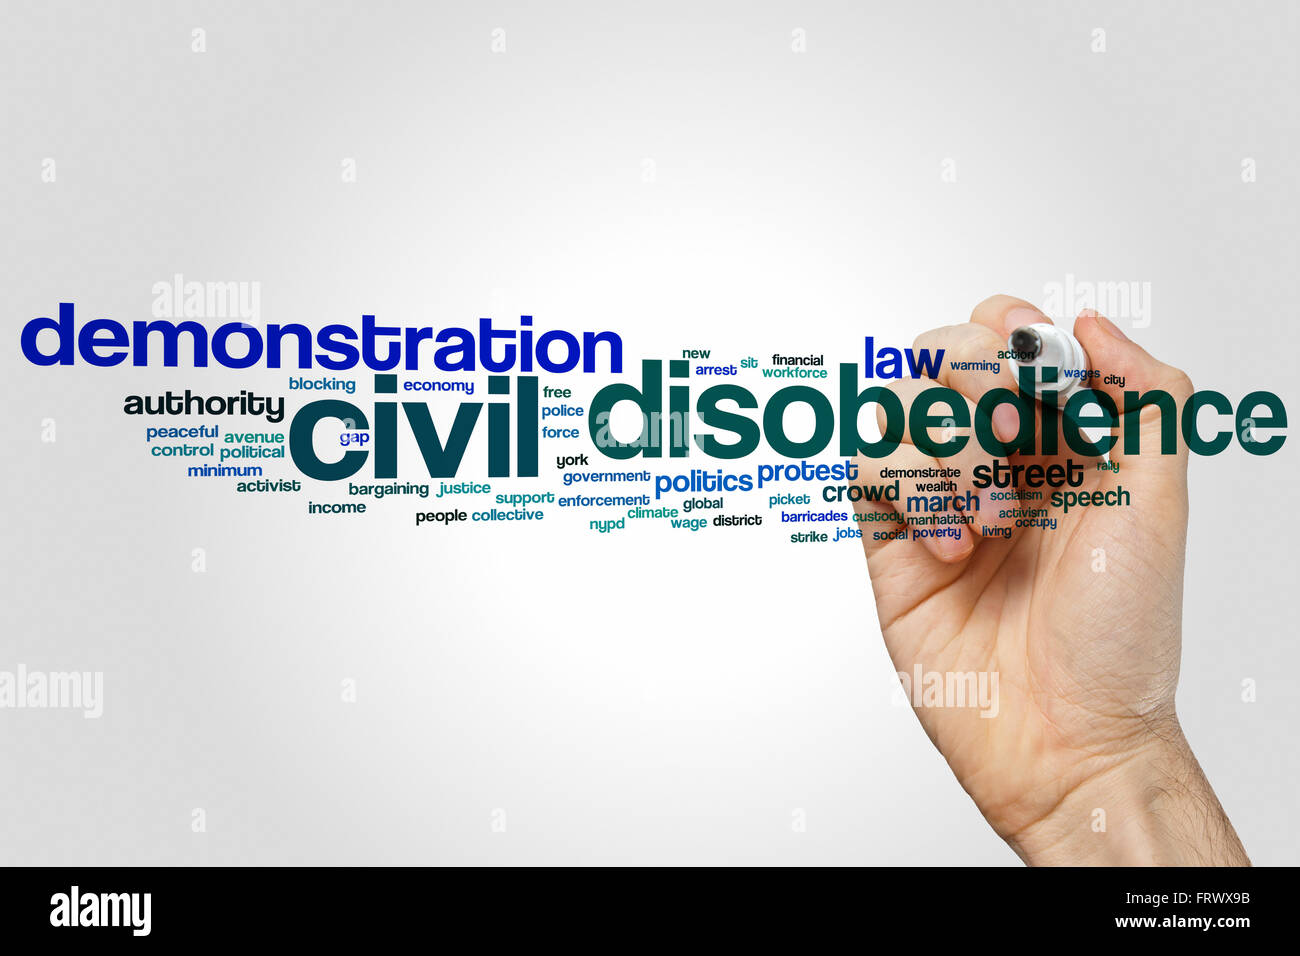 Civil disobedience word cloud concept with demonstration protest related tags Stock Photo